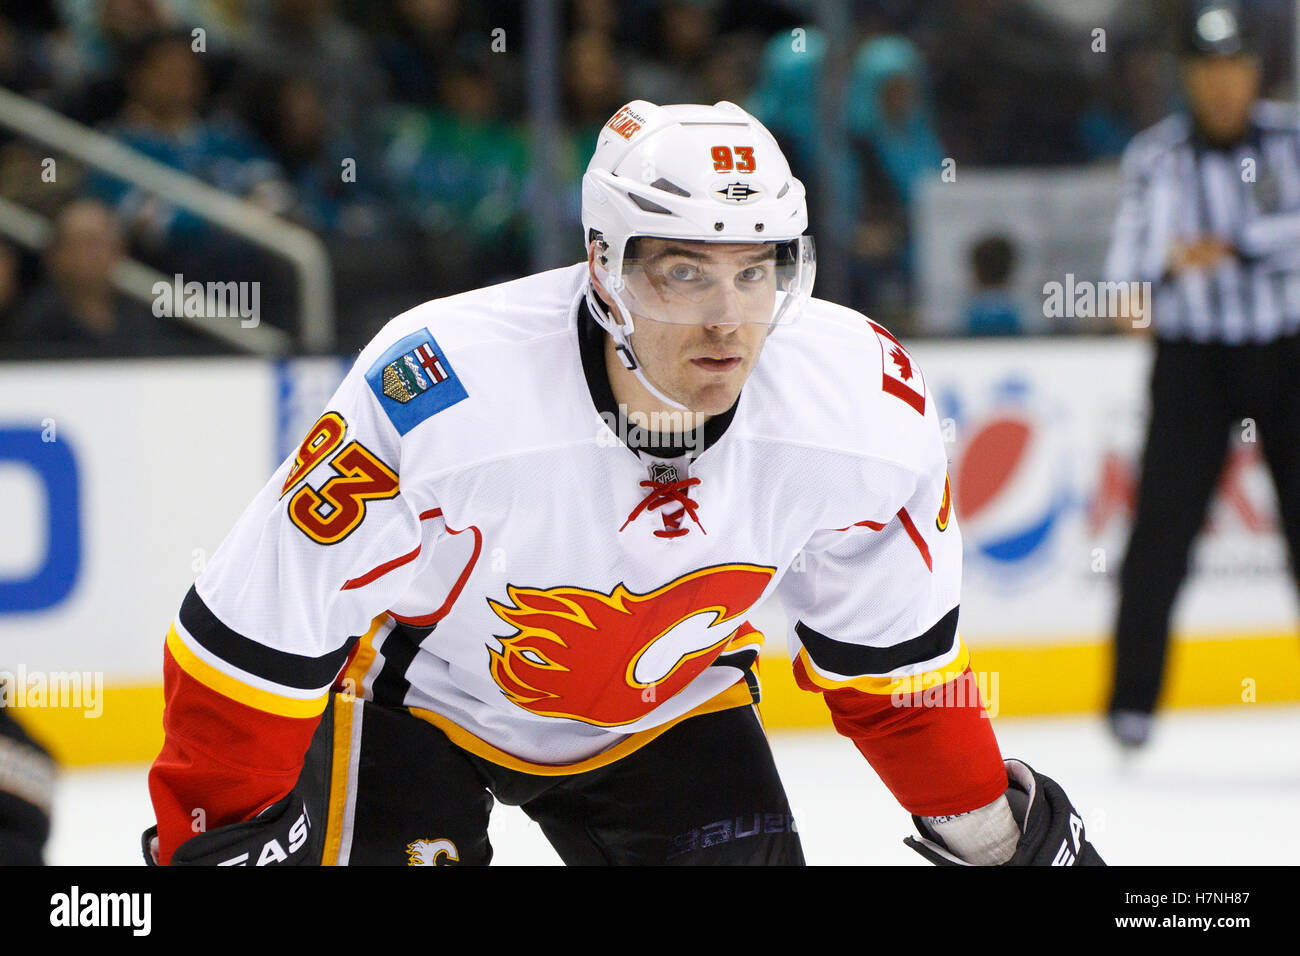 Feb 8, 2012; San Jose, CA, USA; Calgary Flames left wing Mike Cammalleri (93) before a face off against the San Jose Sharks during the second period at HP Pavilion. Calgary defeated San Jose 4-3. Stock Photo